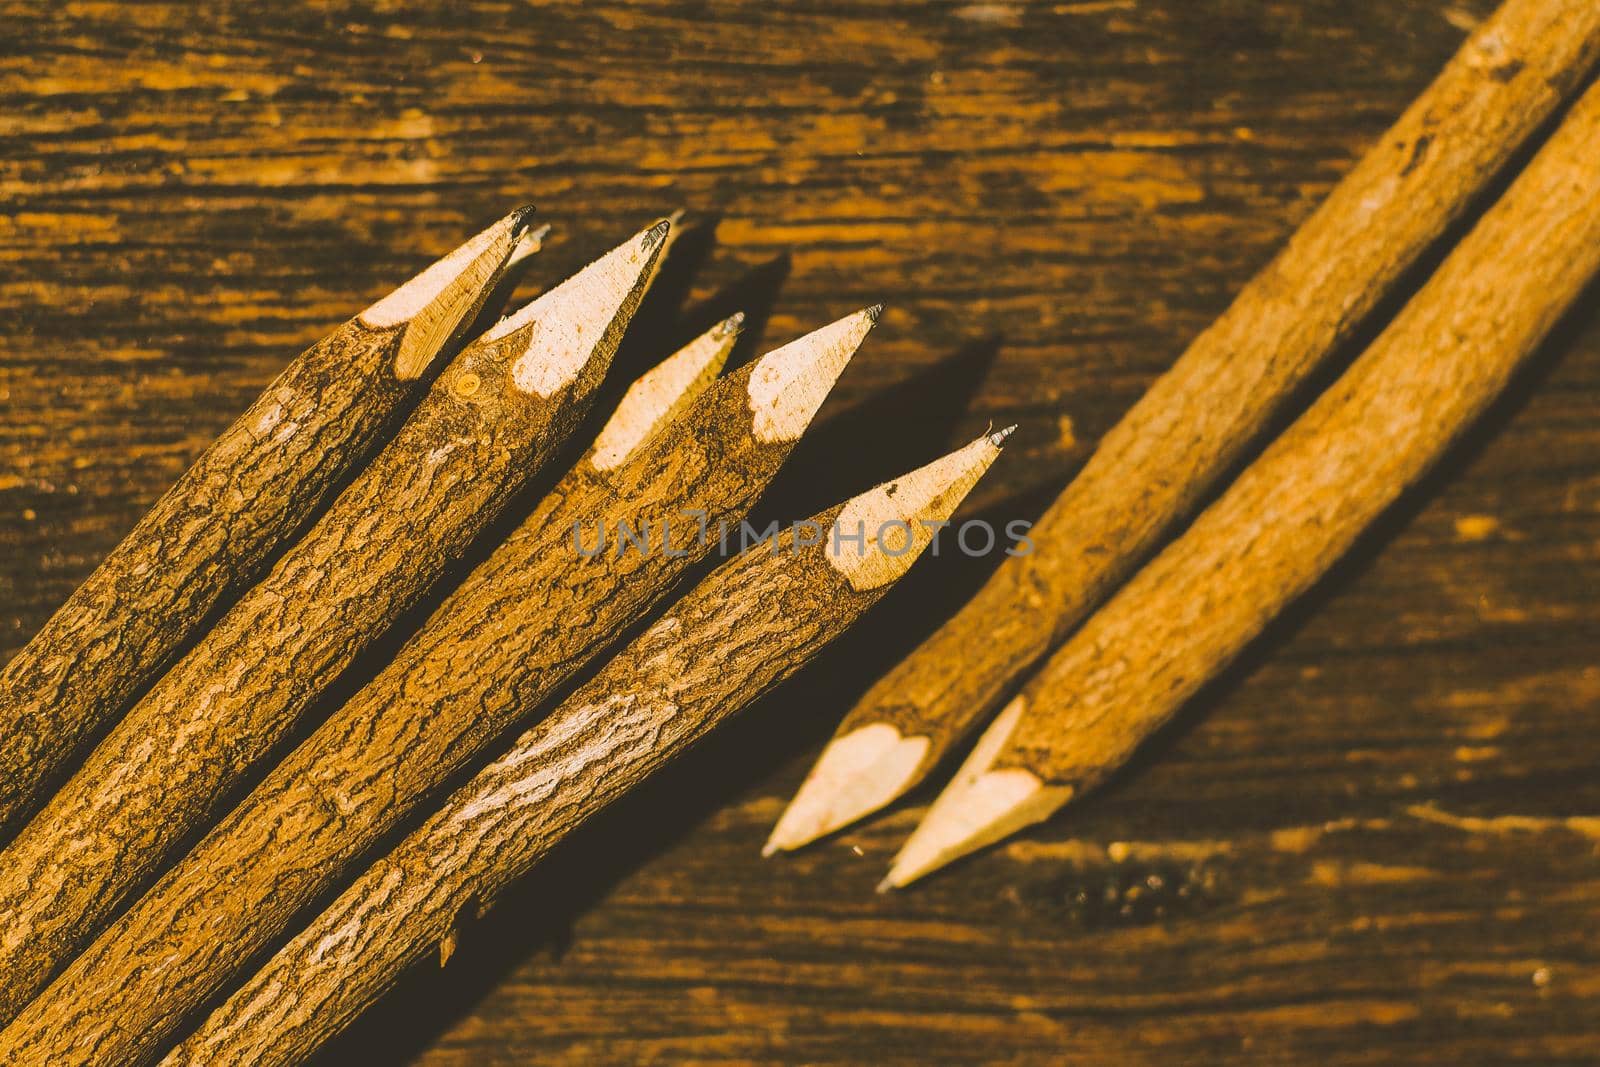 Sharp nature wood pencils on old wooden table in background